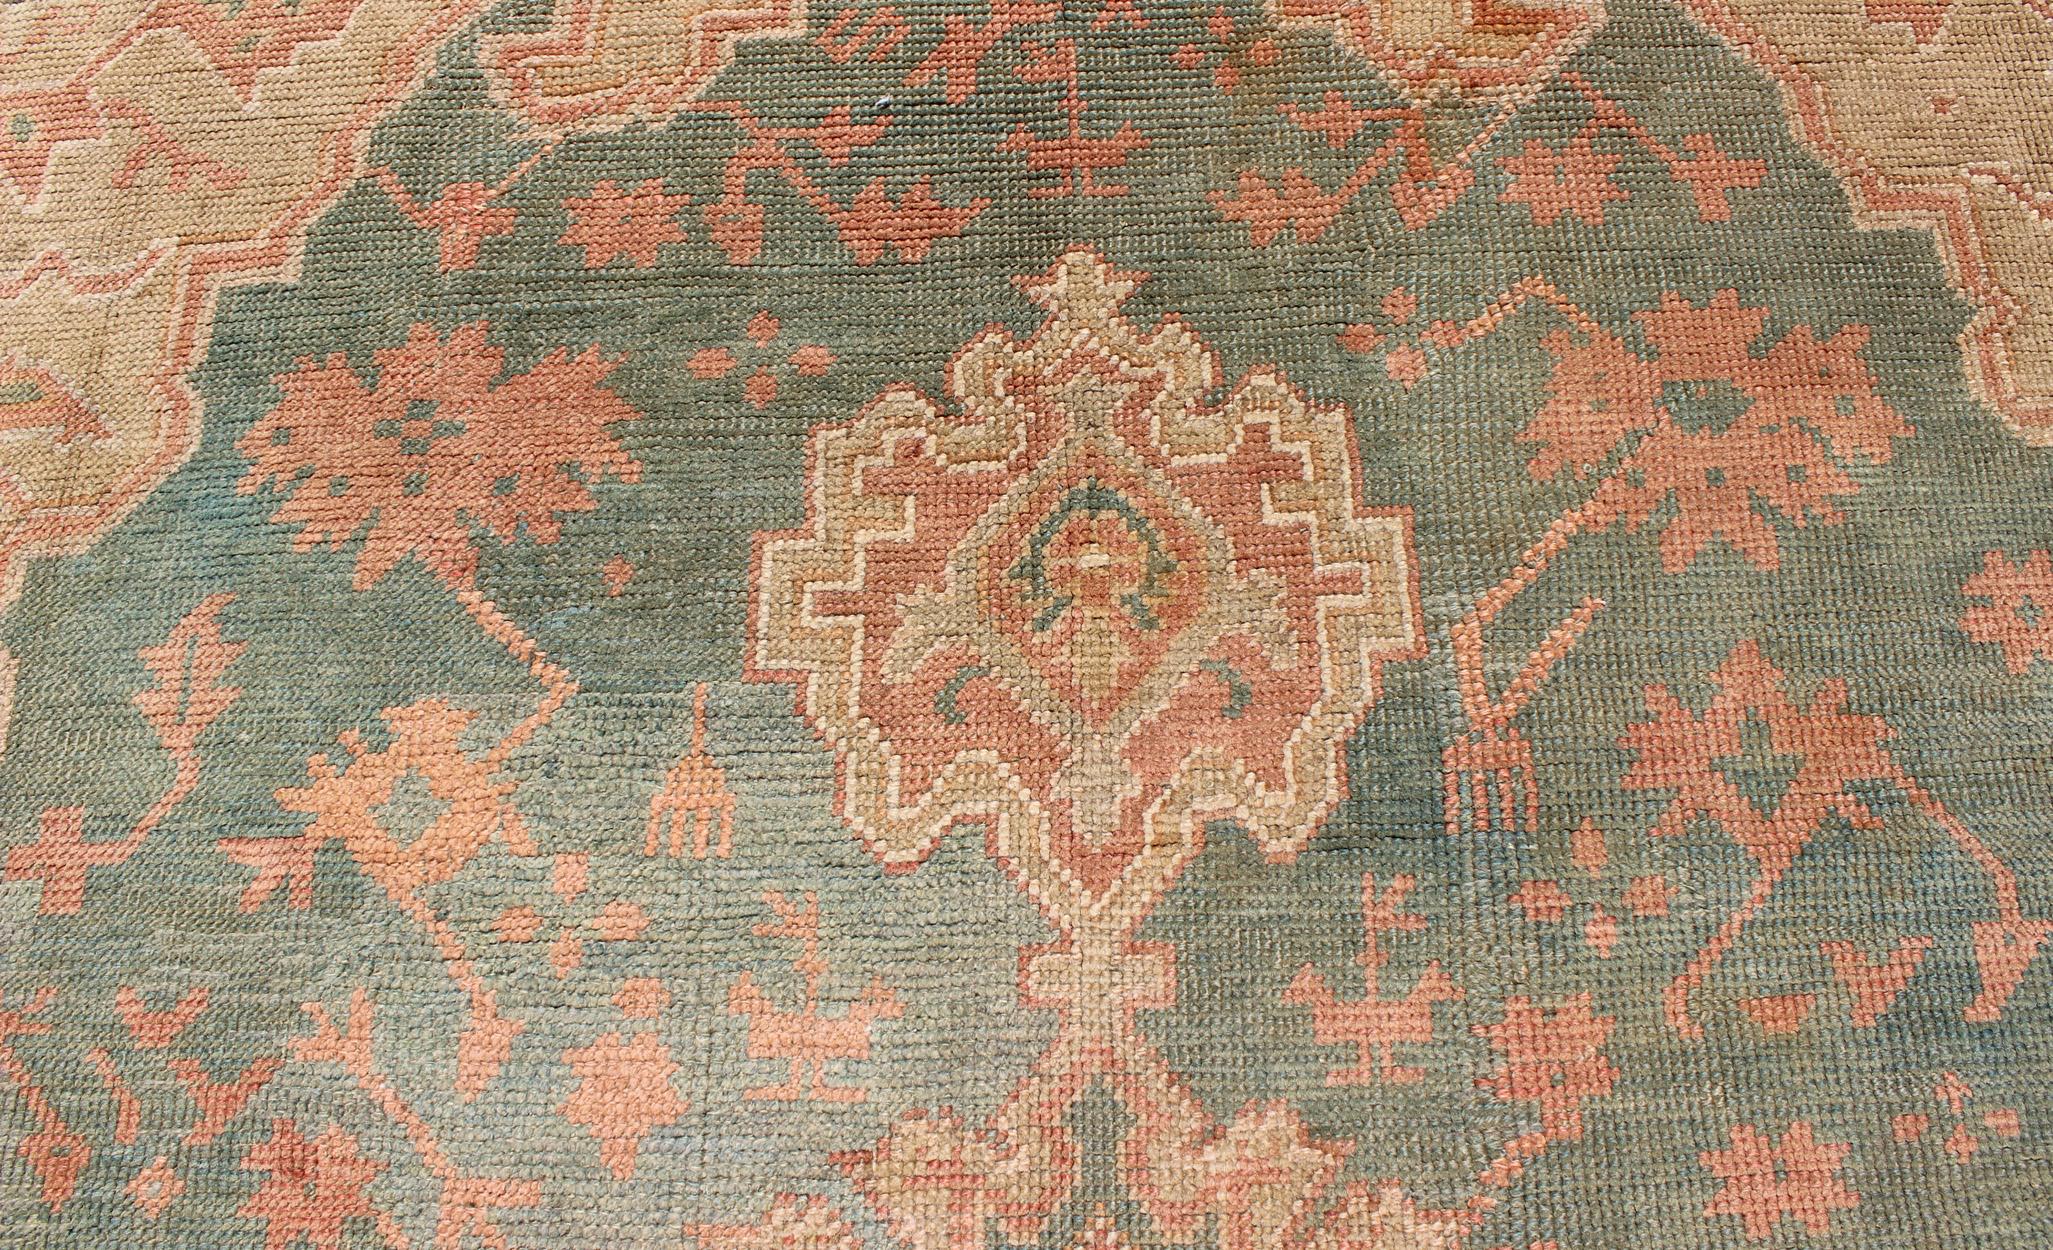 Antique Turkish Medallion Oushak Rug in Teal Green, Rose and Buttery Colors 2